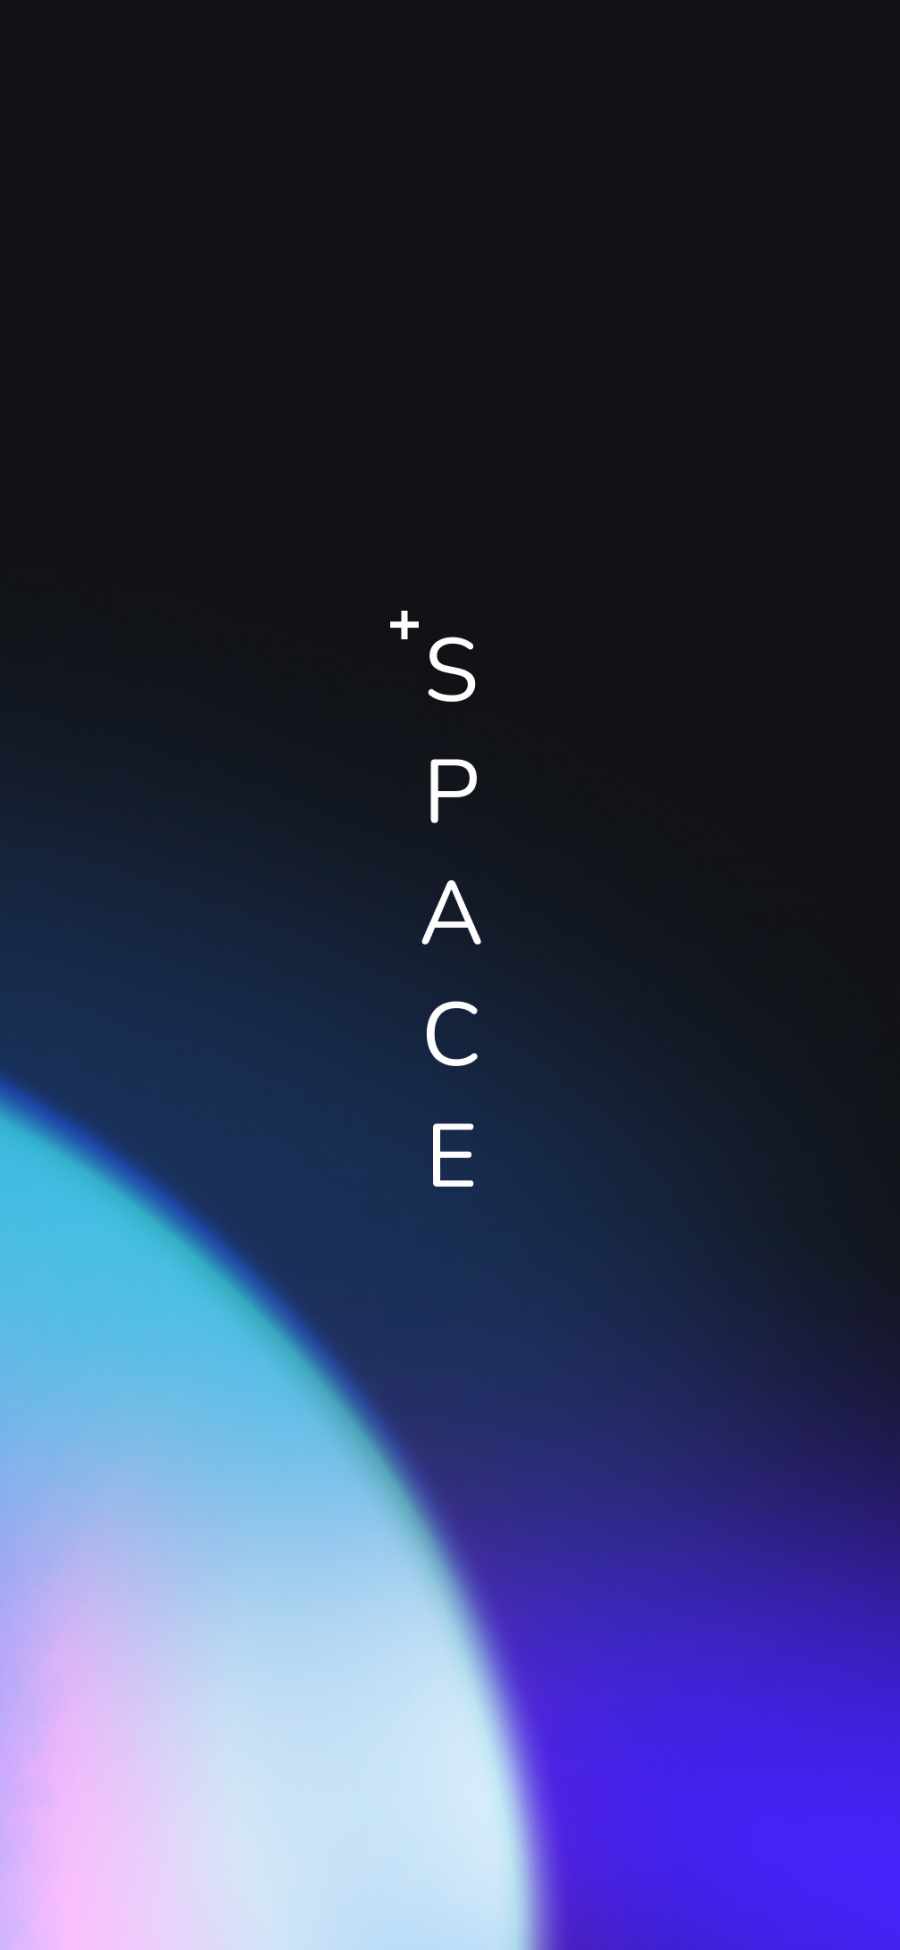 More Space IPhone Wallpaper - IPhone Wallpapers : iPhone Wallpapers